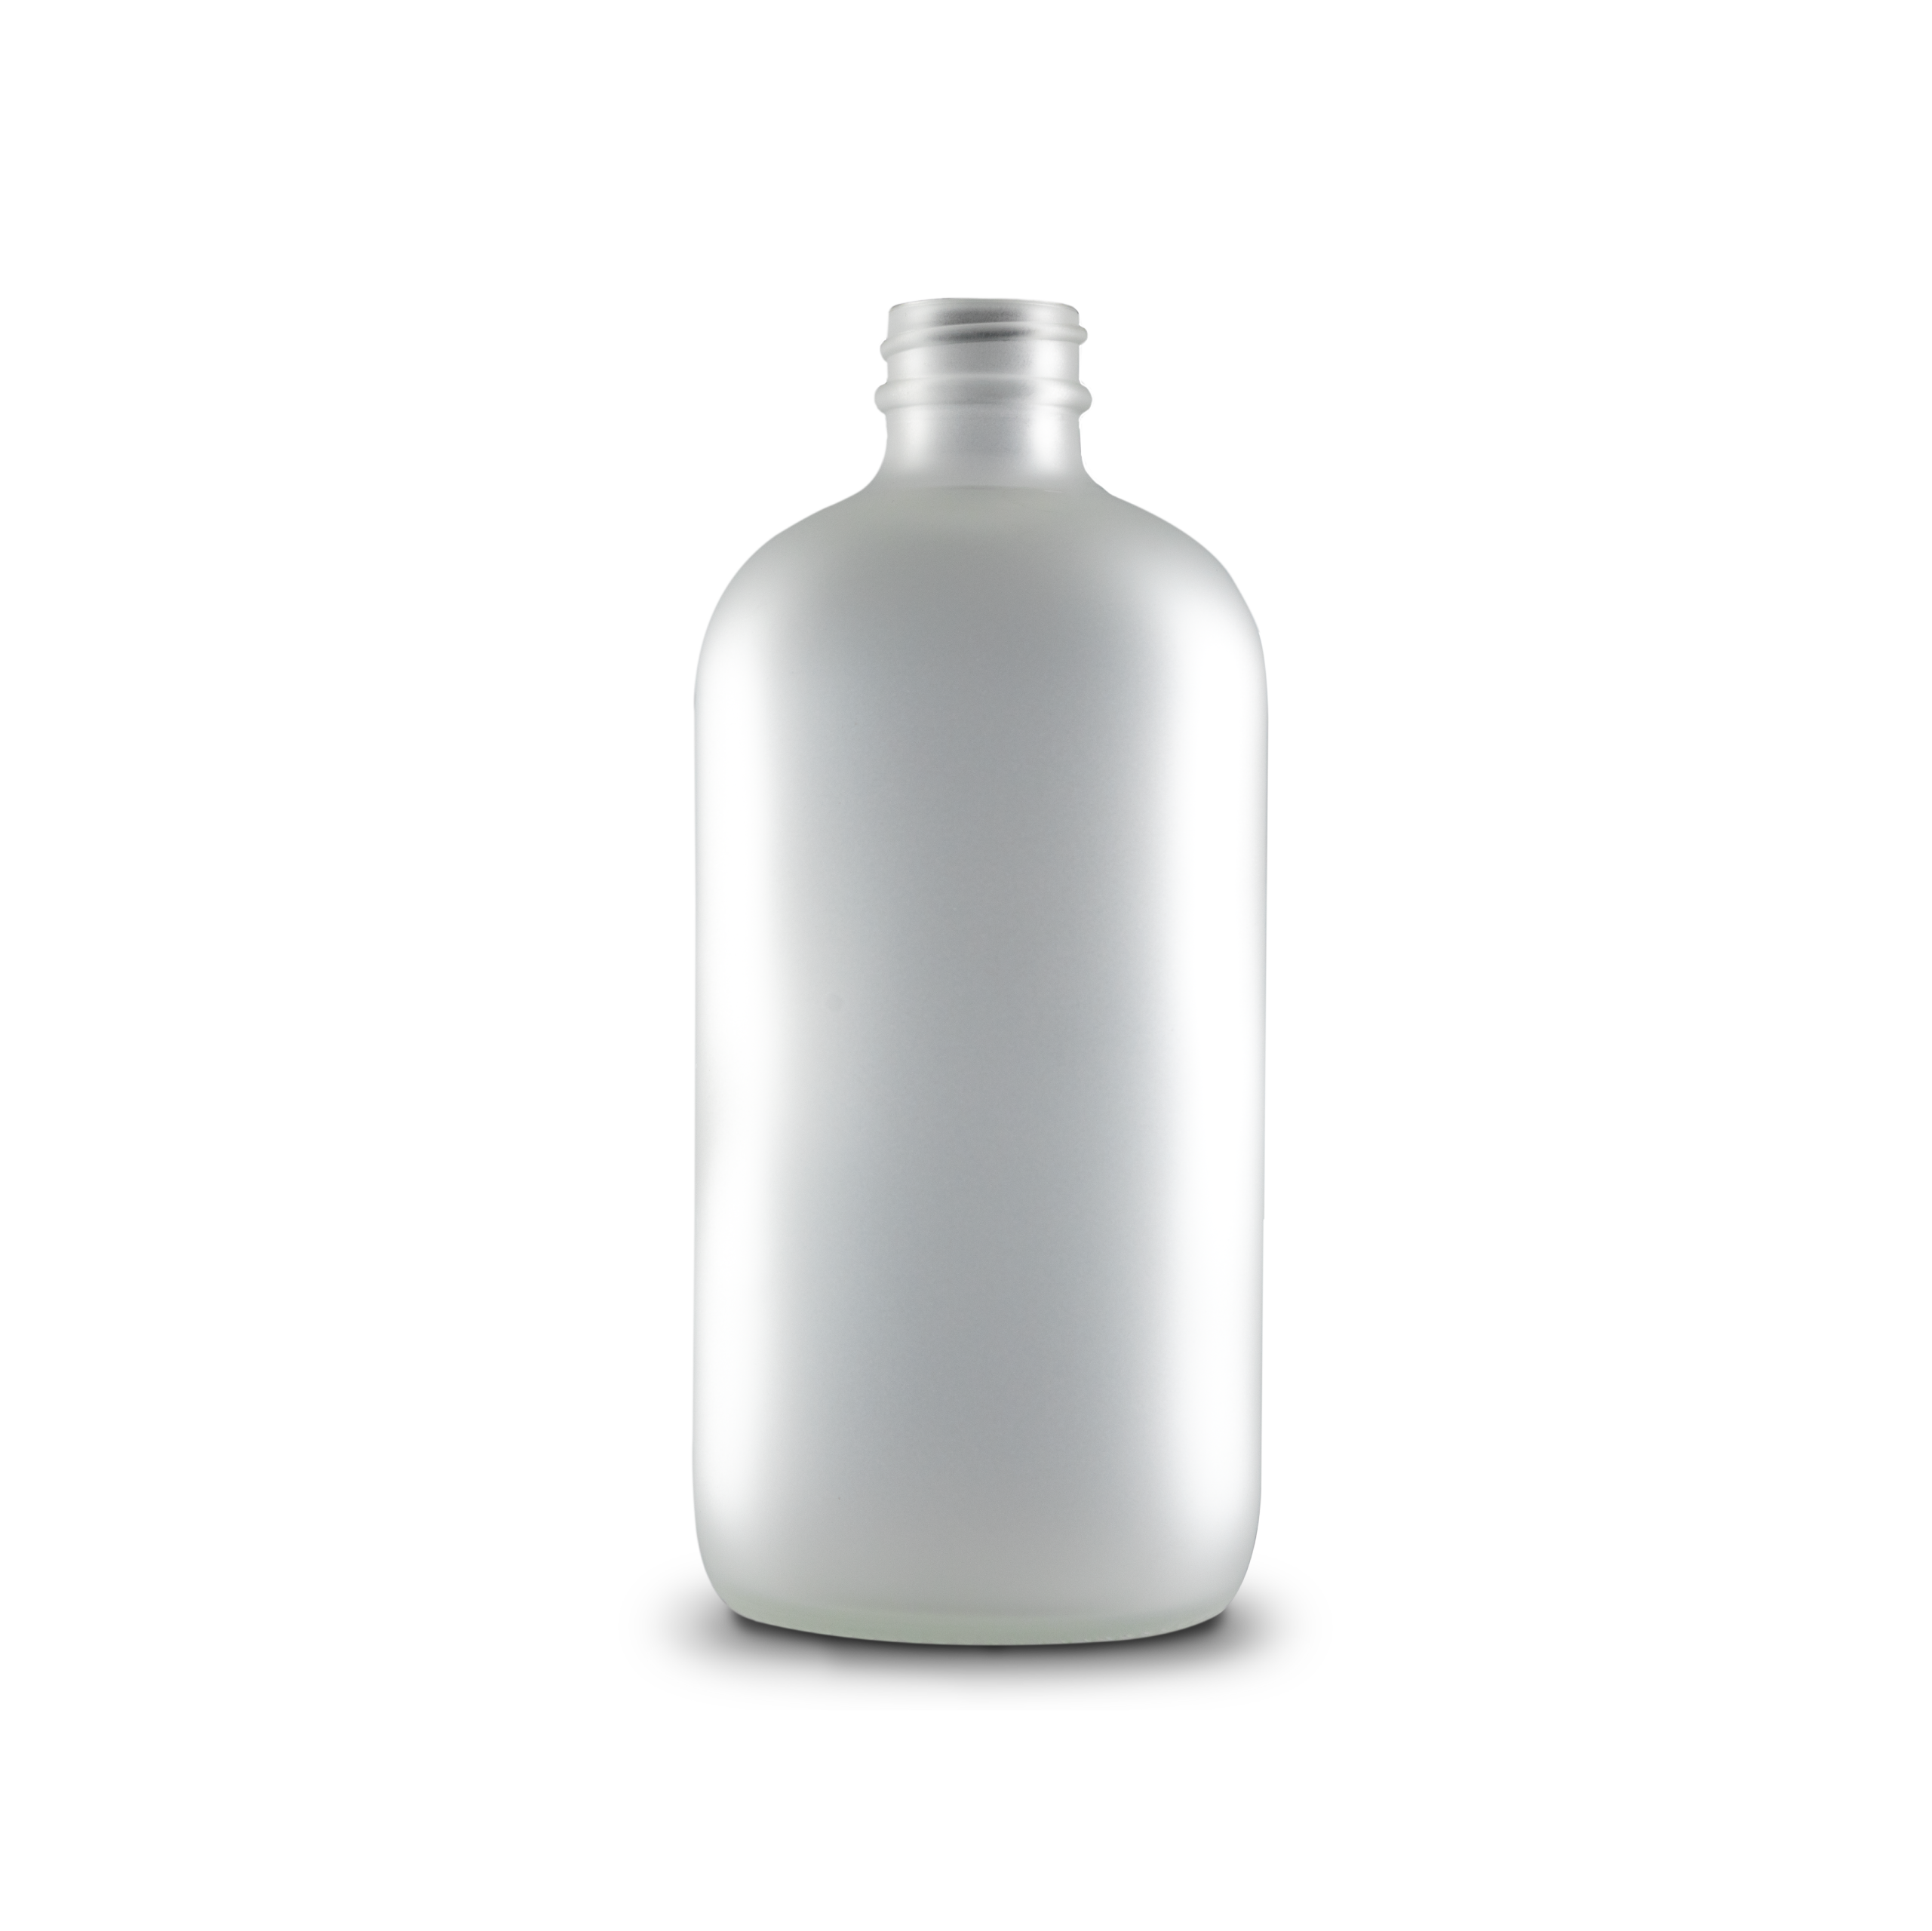 16 oz CLEAR glass bottle with 28-400 neck finish with Black Trigger Sprayer